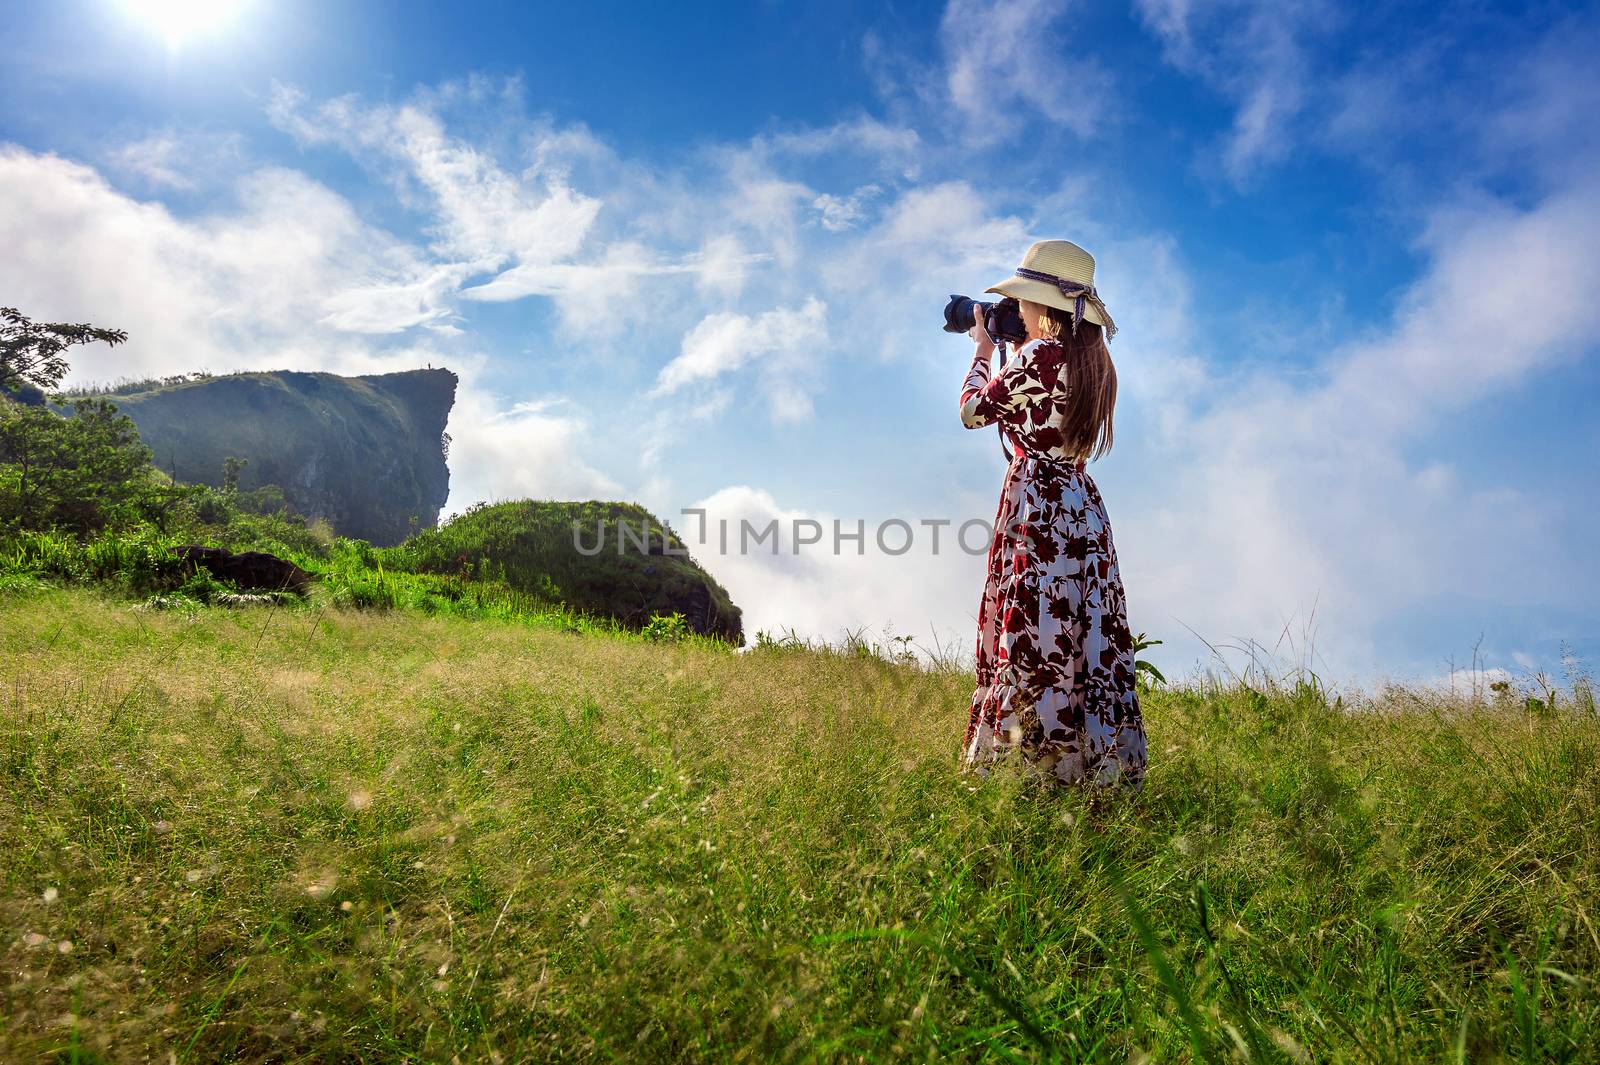 Woman standing on meadow and holding camera take photo at Phu Chi Fa mountains in Chiangrai, Thailand. Travel concept.